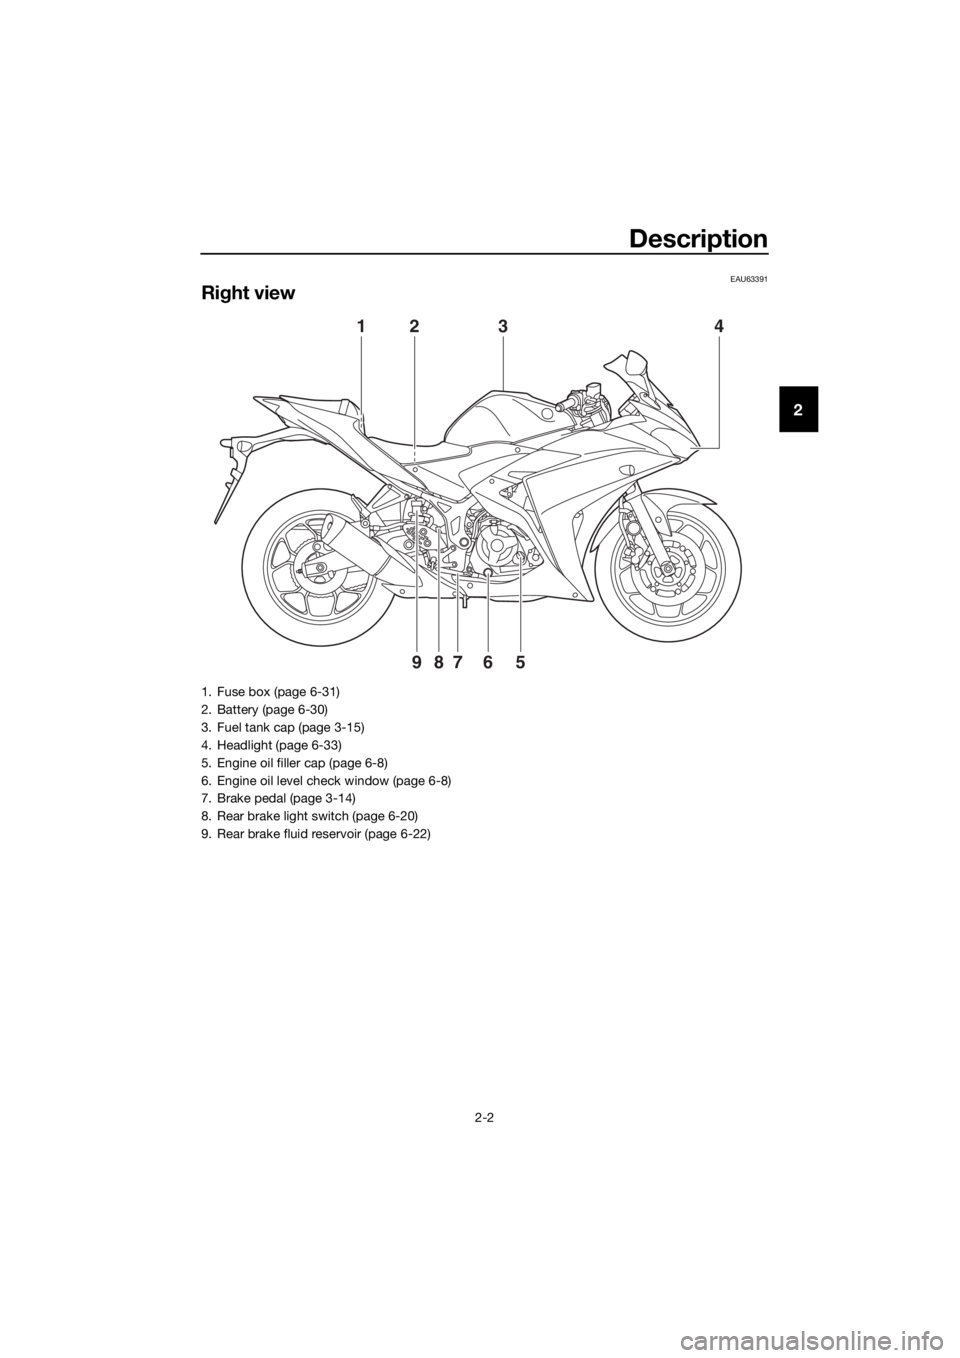 YAMAHA YZF-R3 2018  Owners Manual Description
2-2
2
EAU63391
Right view
4
9
123
8765
1. Fuse box (page 6-31)
2. Battery (page 6-30)
3. Fuel tank cap (page 3-15)
4. Headlight (page 6-33)
5. Engine oil filler cap (page 6-8)
6. Engine oi